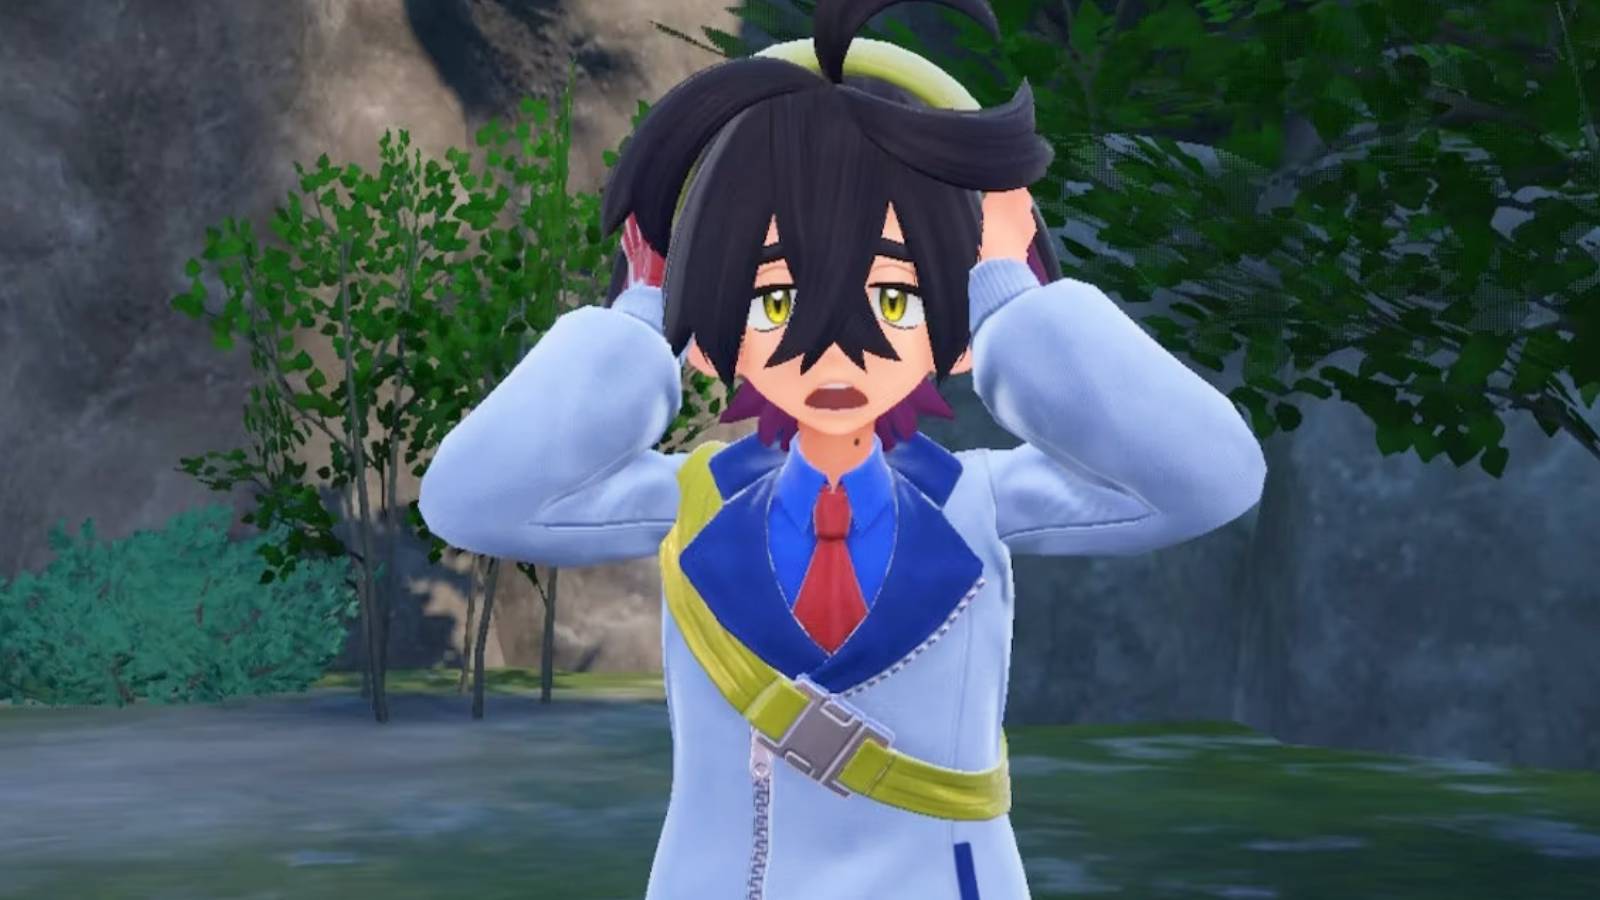 A screenshot from Pokemon Scarlet and Violet shows the character Kieran looking shocked